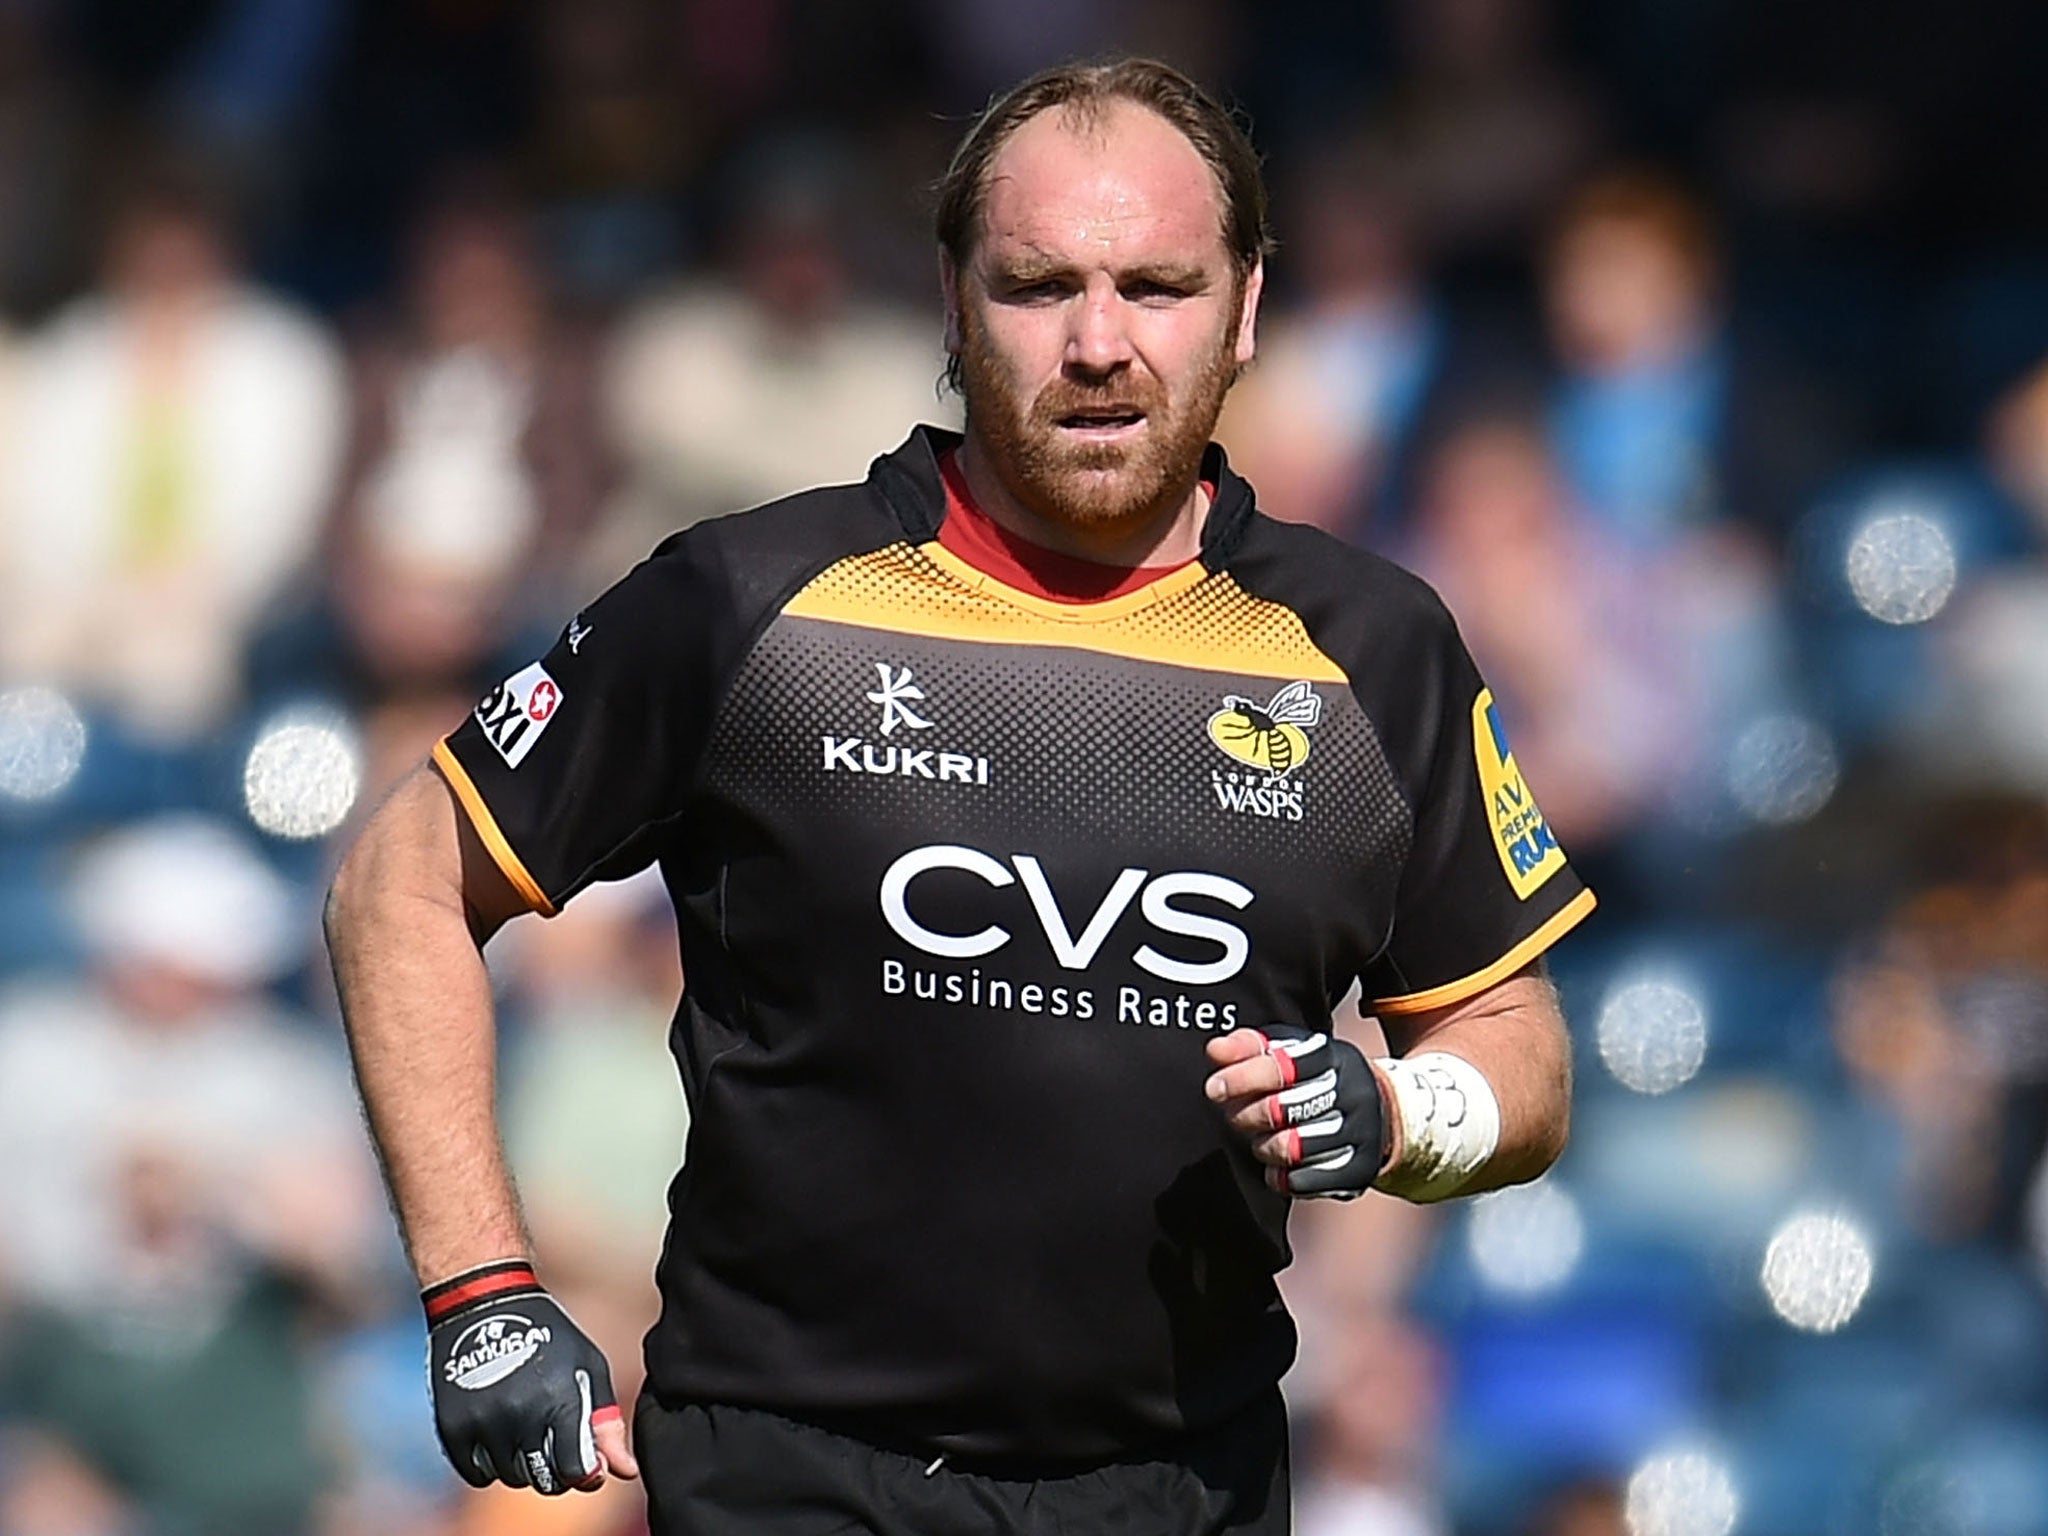 Andy Goode in action for Wasps against Newcastle on Saturday